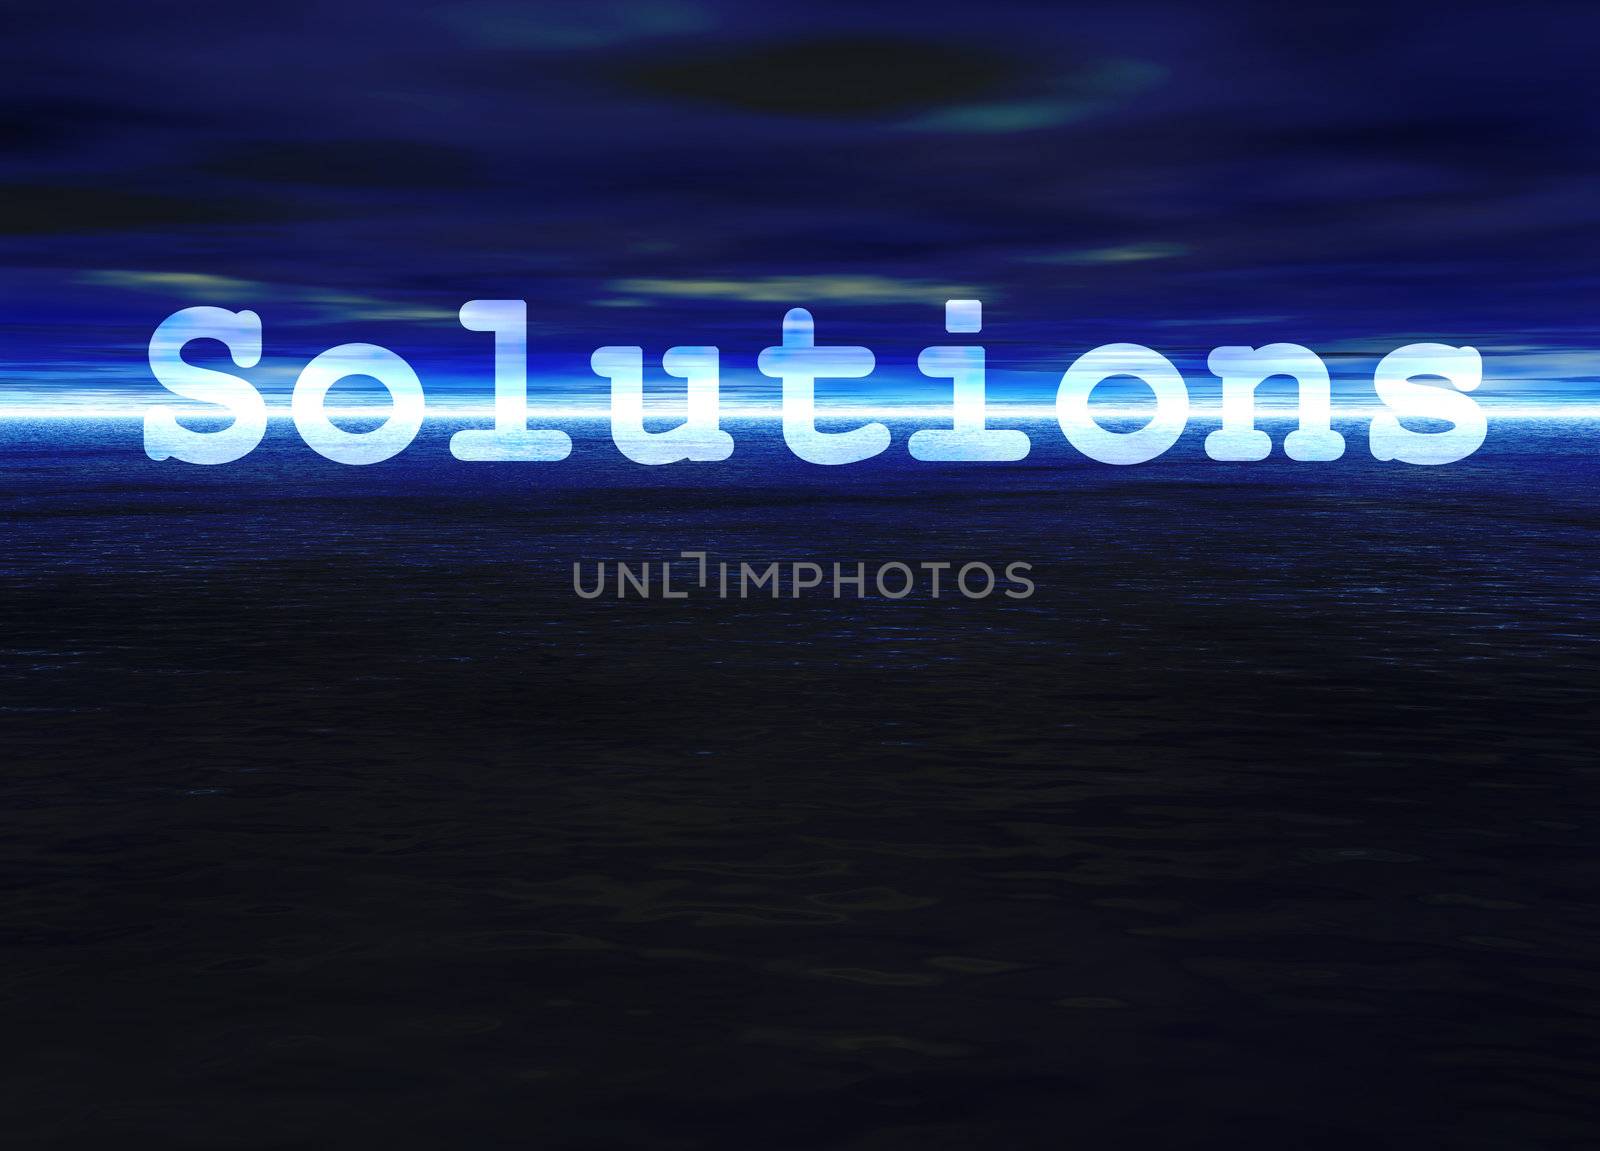 Solutions Text on Stunning Blue Bright Ocean Sea Horizon at Nigh by bobbigmac